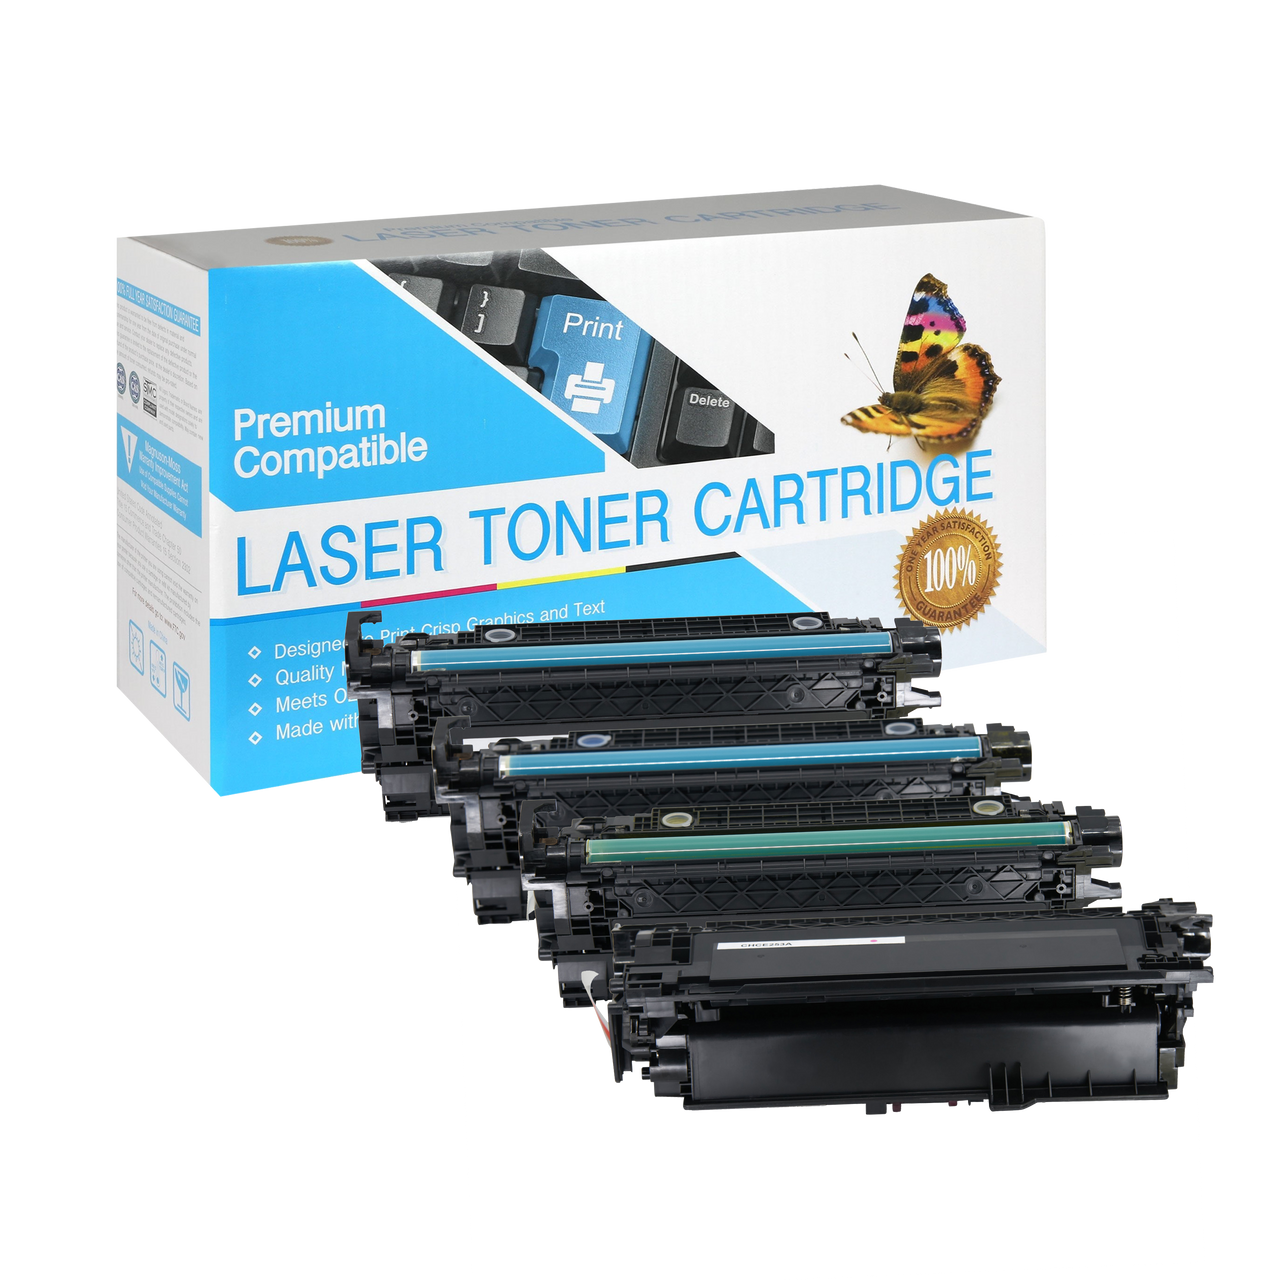 Compatible HP 504A Toner Cartridge (All Colors) by SuppliesOutlet